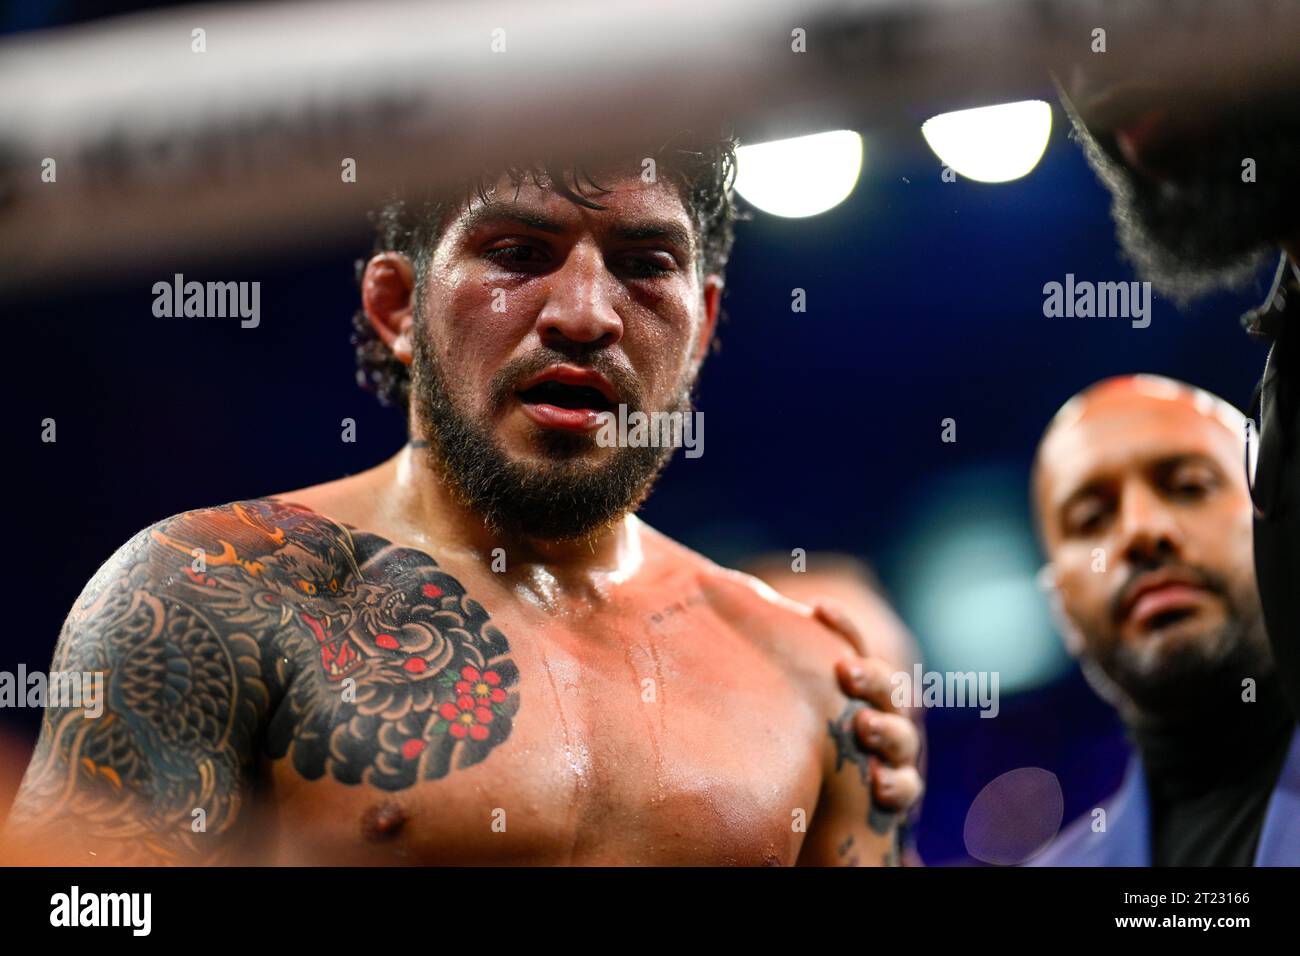 Manchester, UK. Dillon Danis attemps a grapple takedown on Logan Paul during the Prime Card boxing event at Manchester Arena. Paul won by disqualification. Credit: Benjamin Wareing/ Alamy Live News Stock Photo